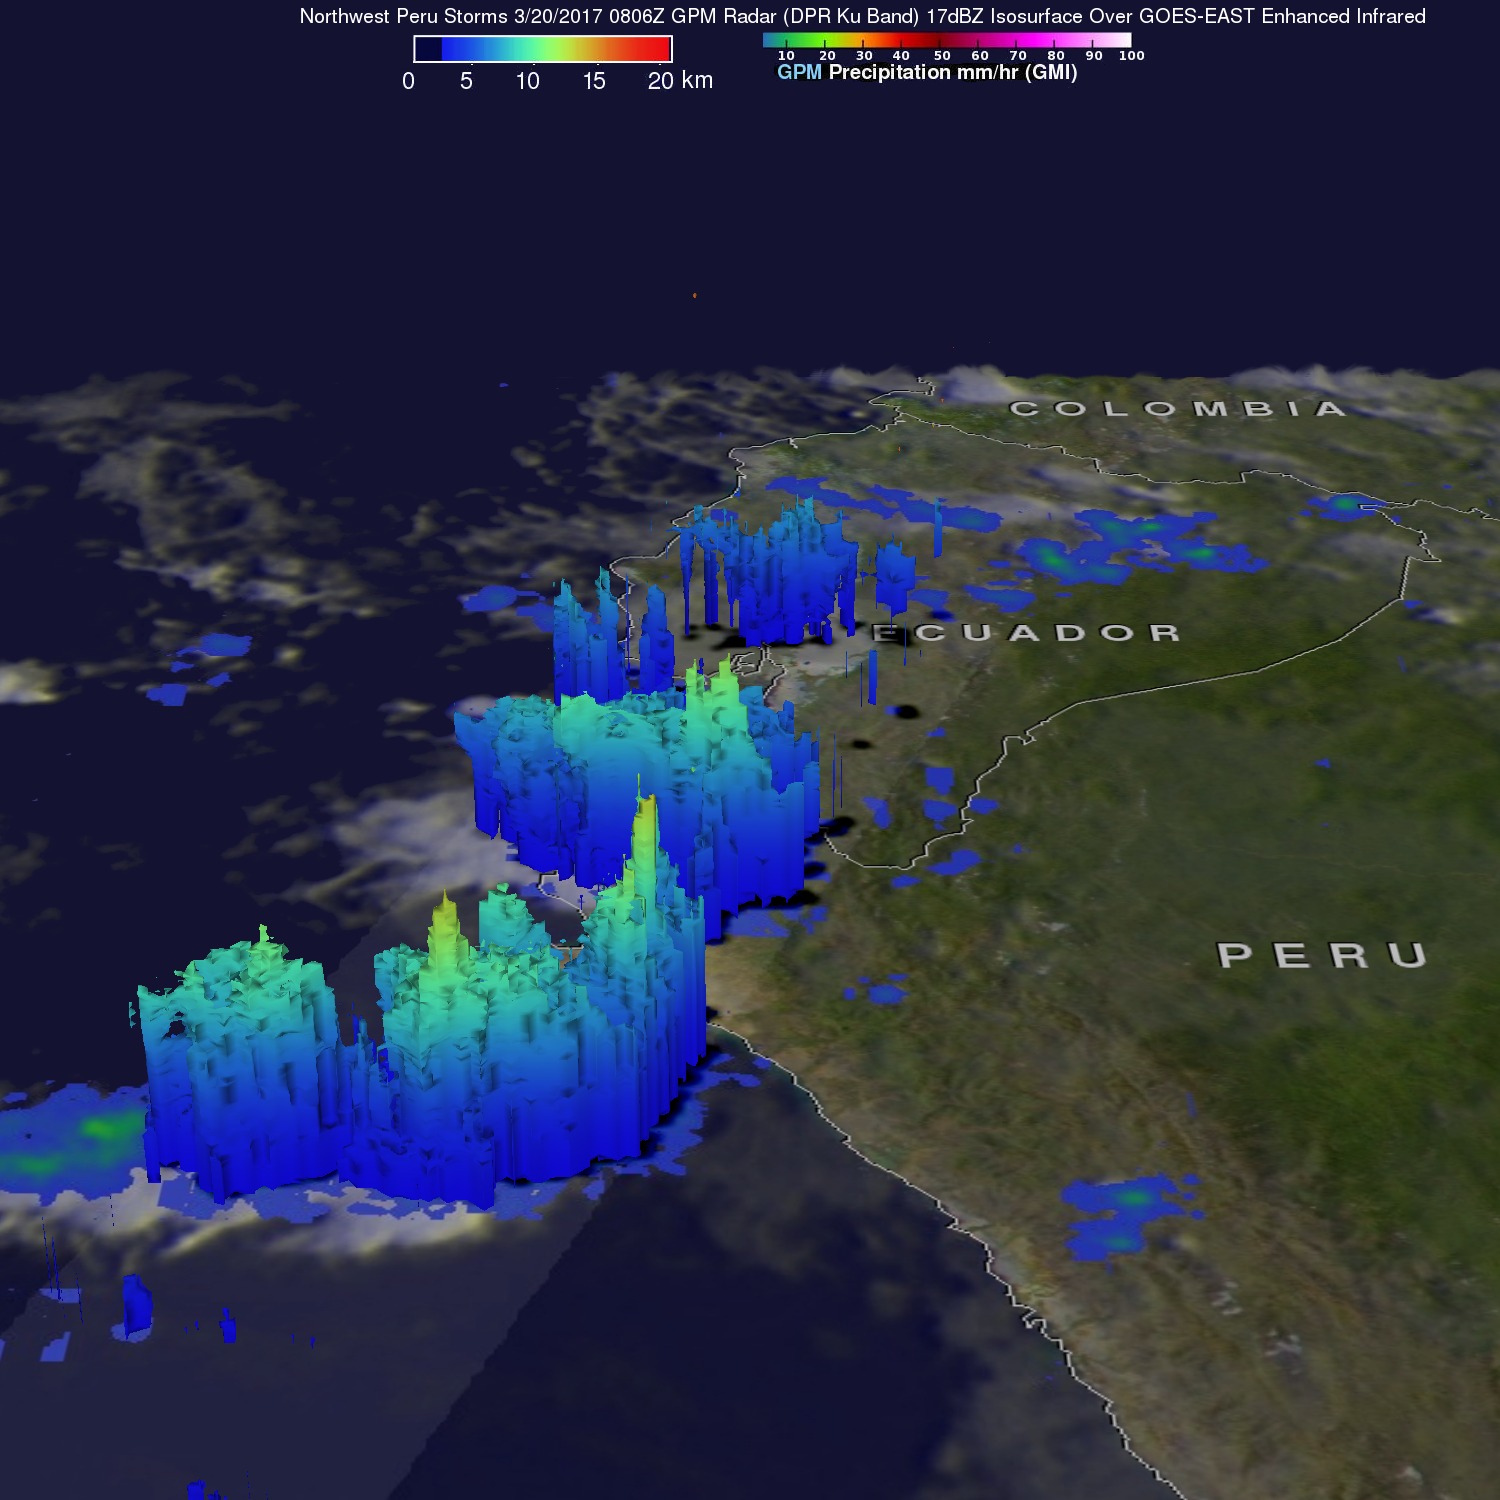 Peru's Deadly Rainfall Examined With NASA's GPM Data